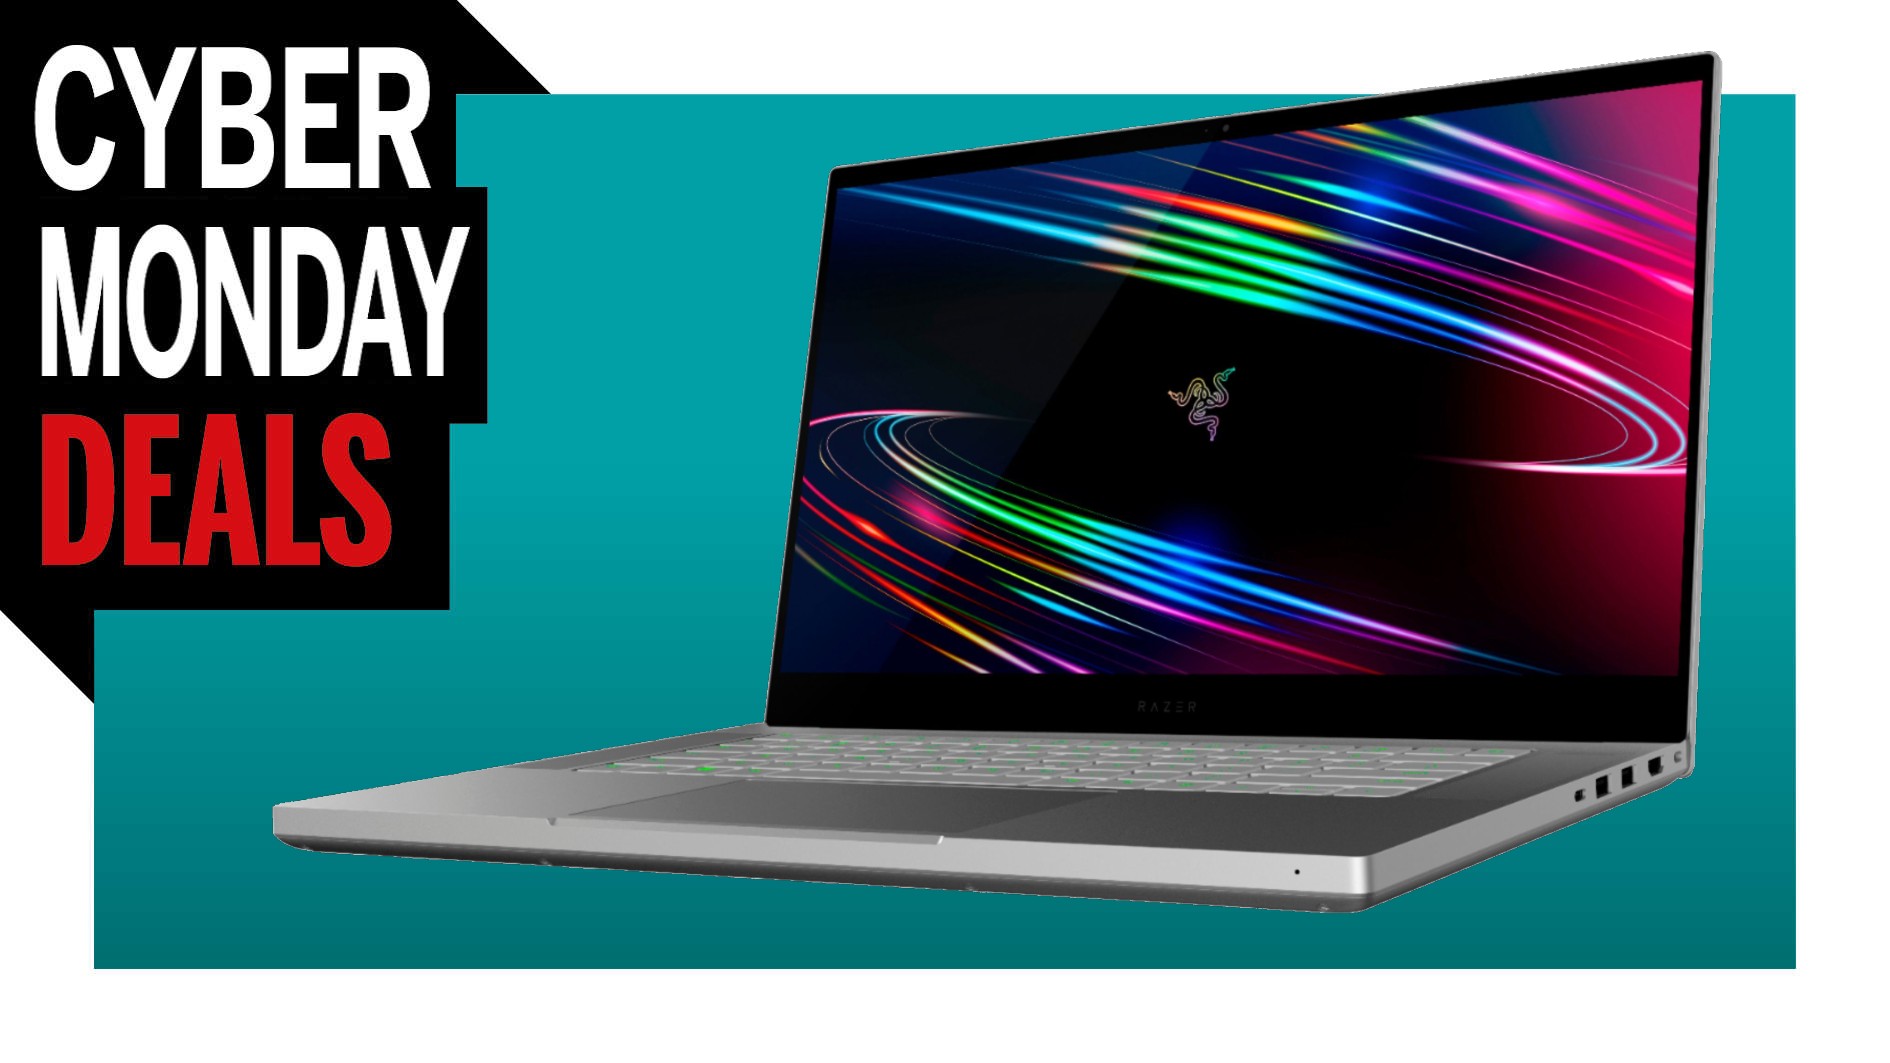  Snag this gorgeous white 4K OLED laptop for $450 off this Cyber Monday 